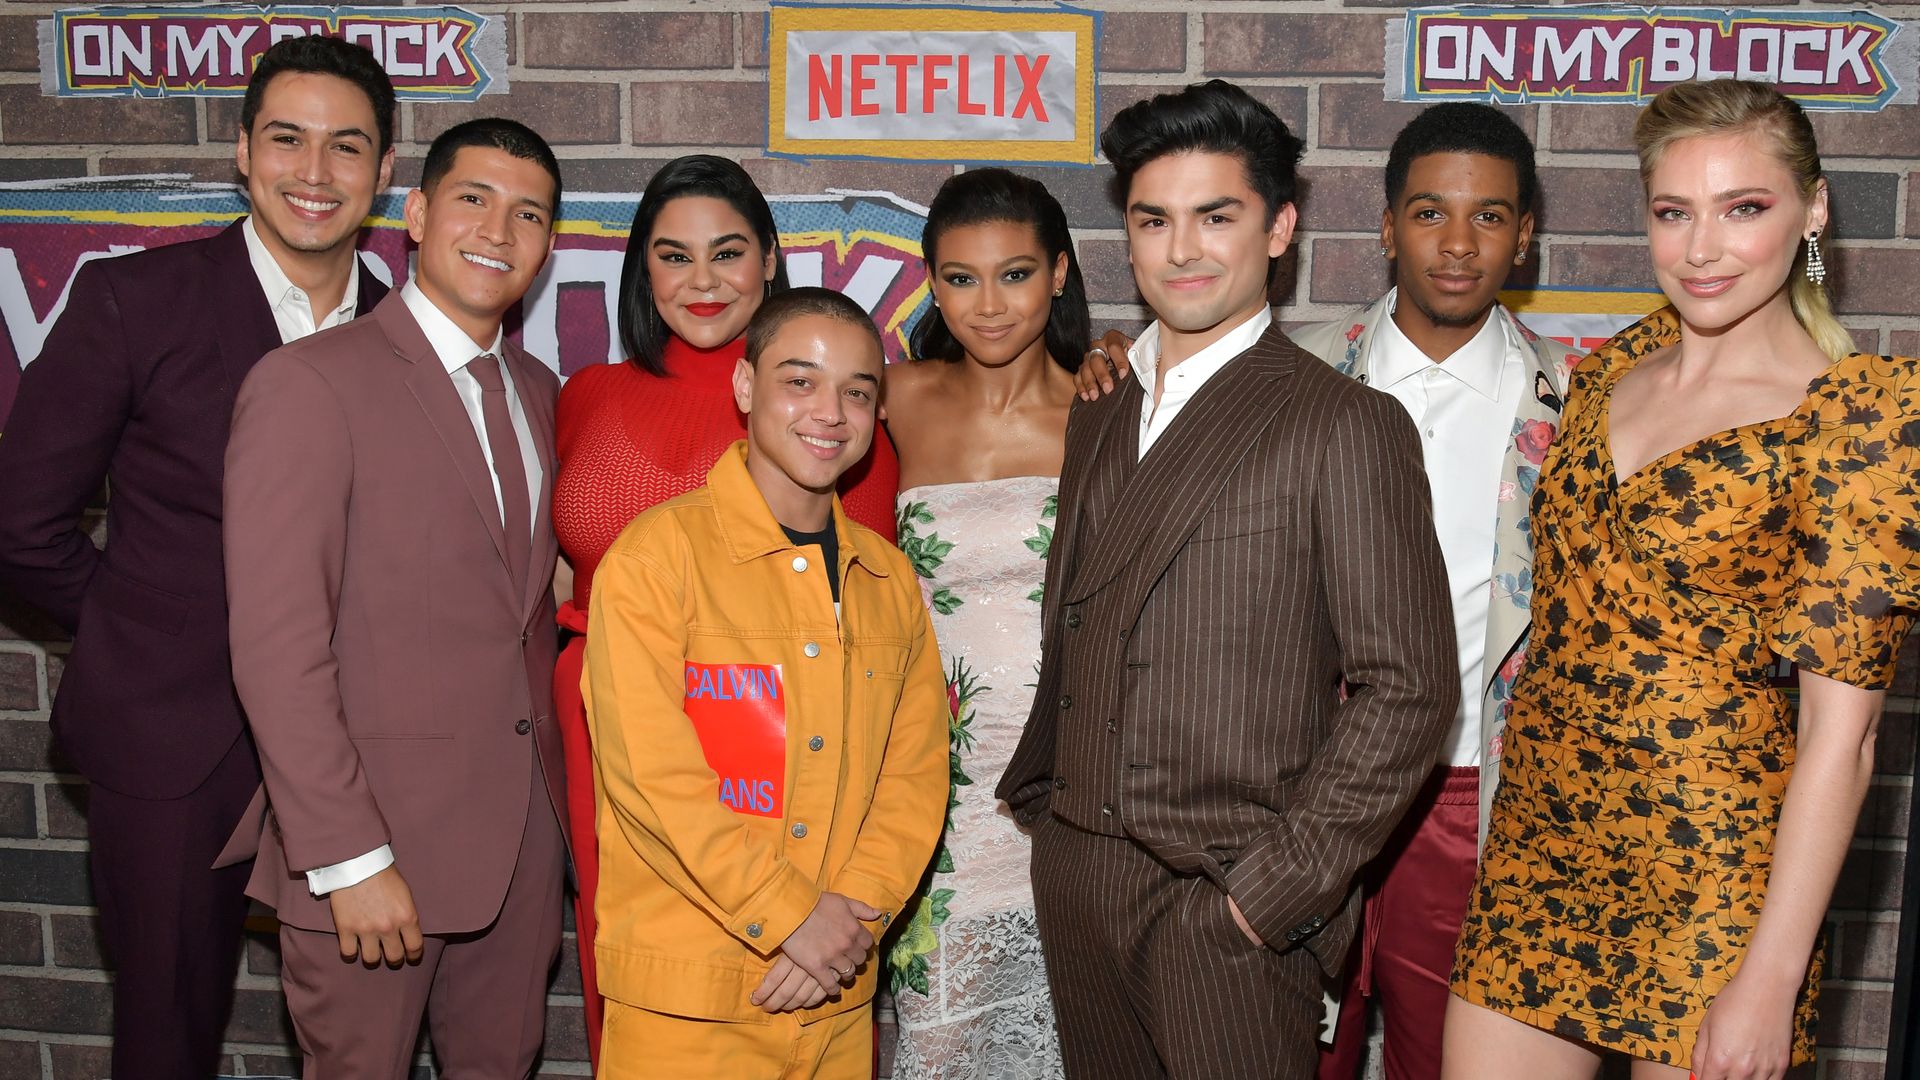 The cast of "On my block."